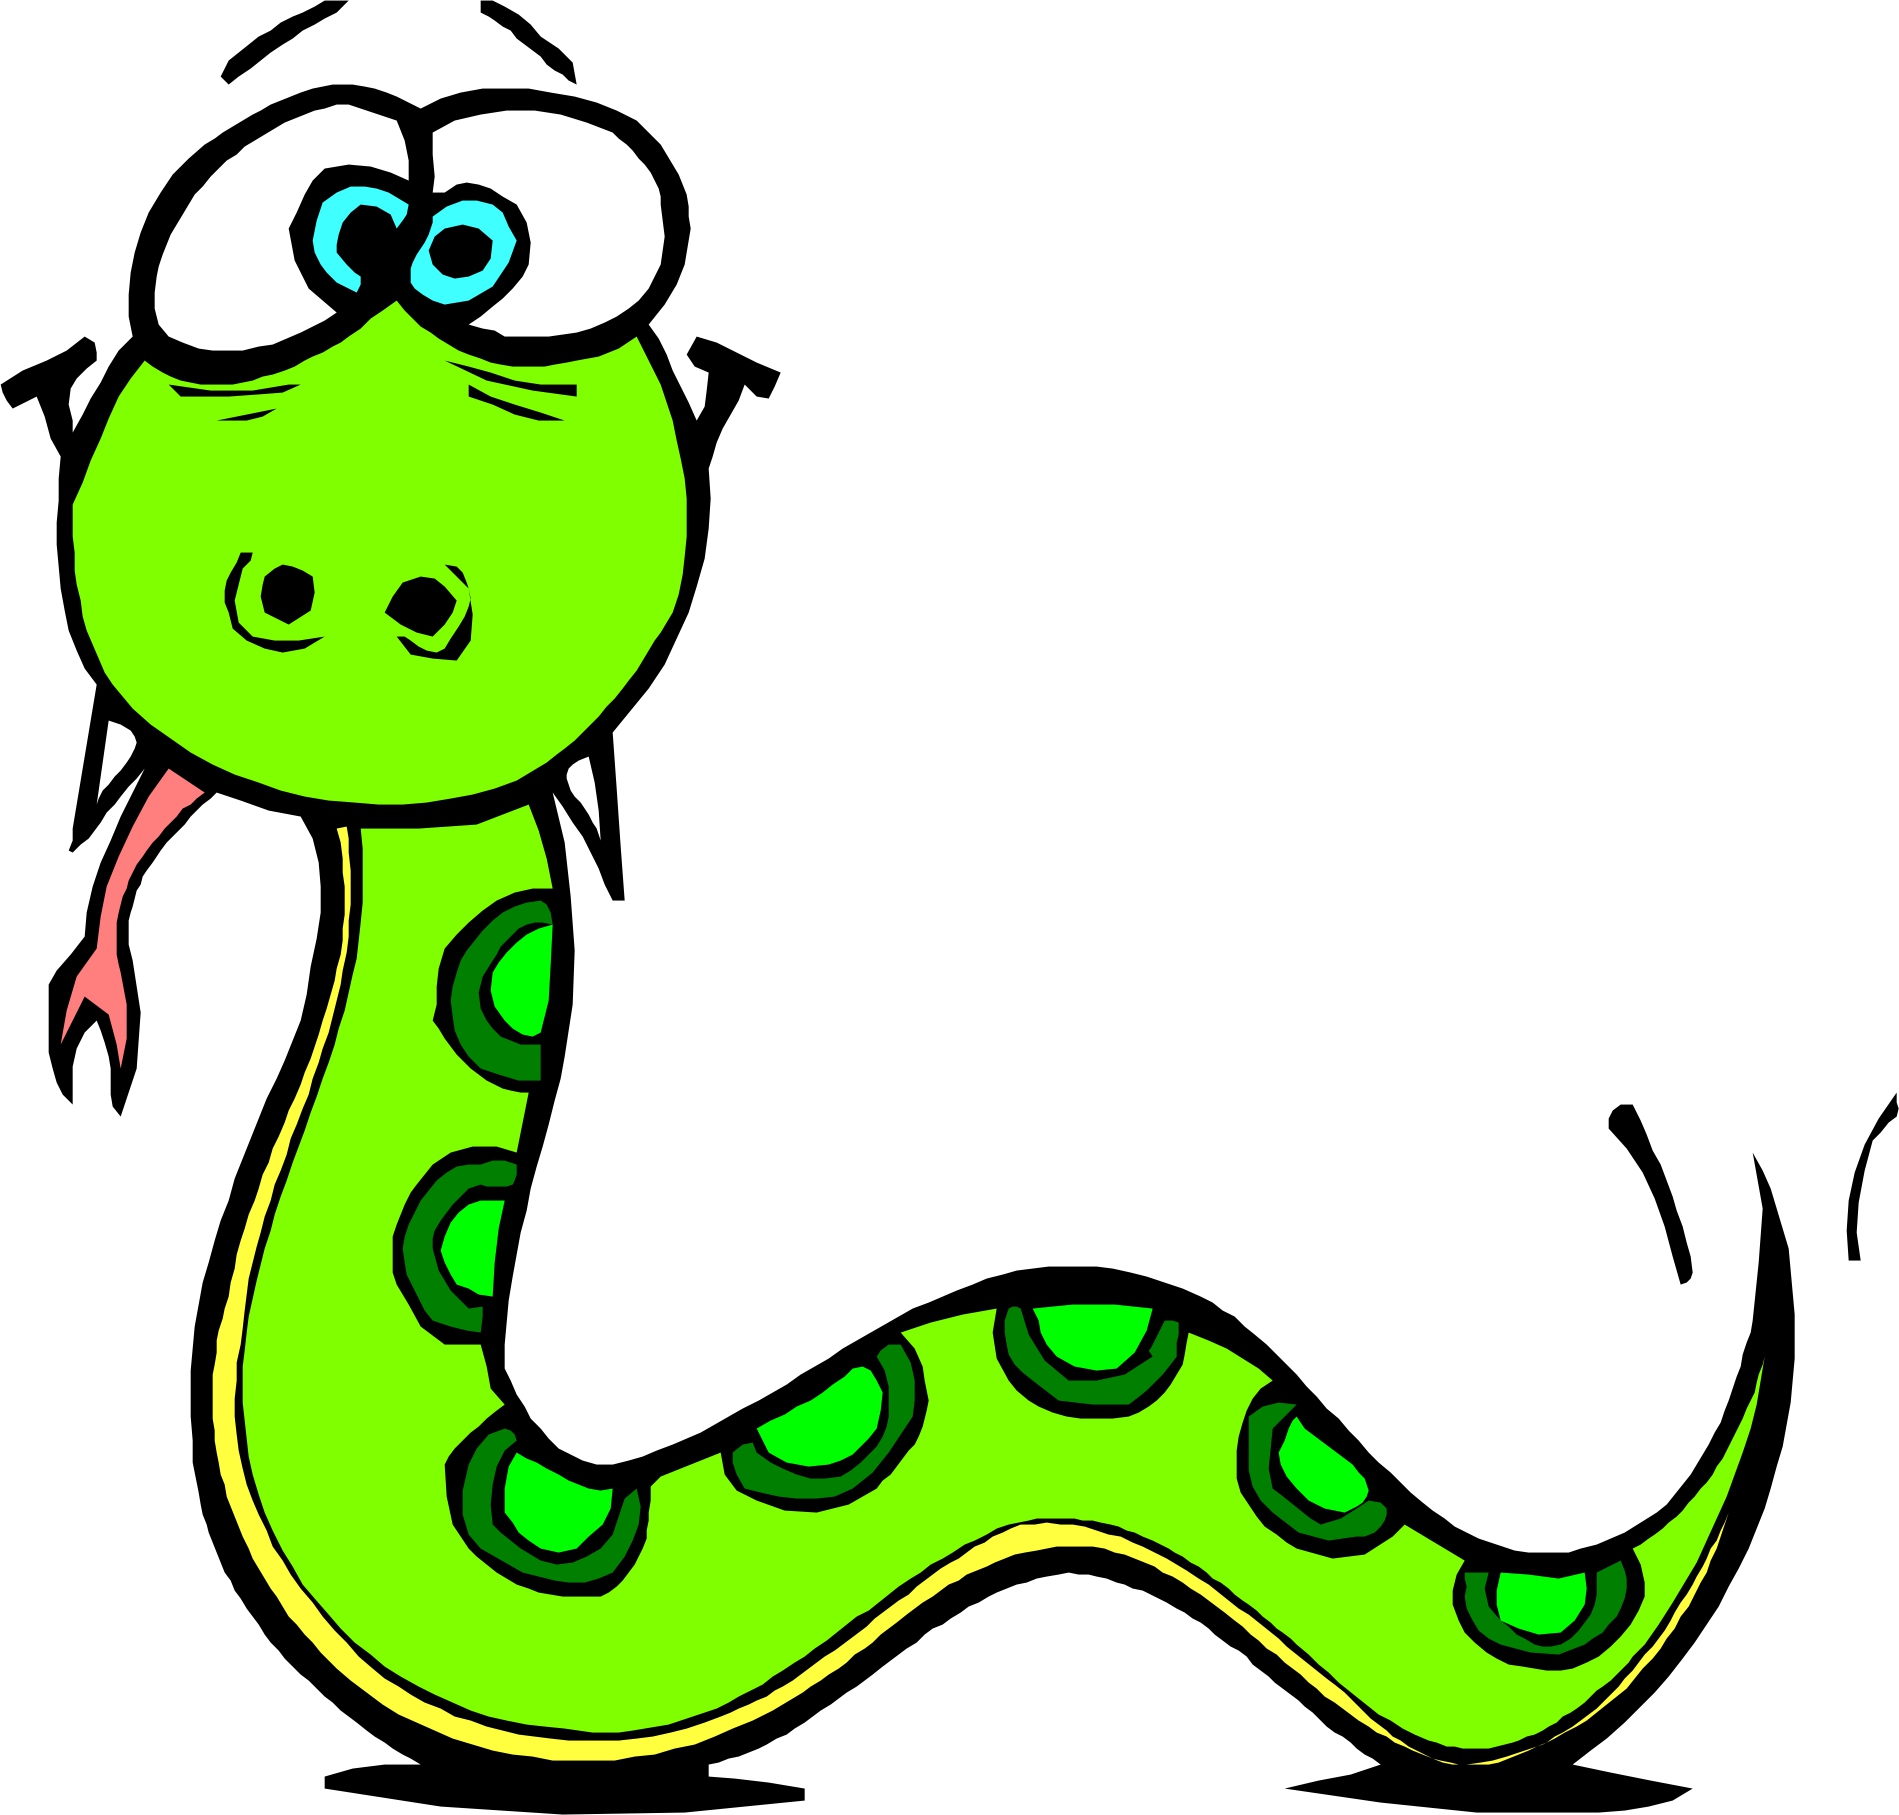 Cool snake clipart